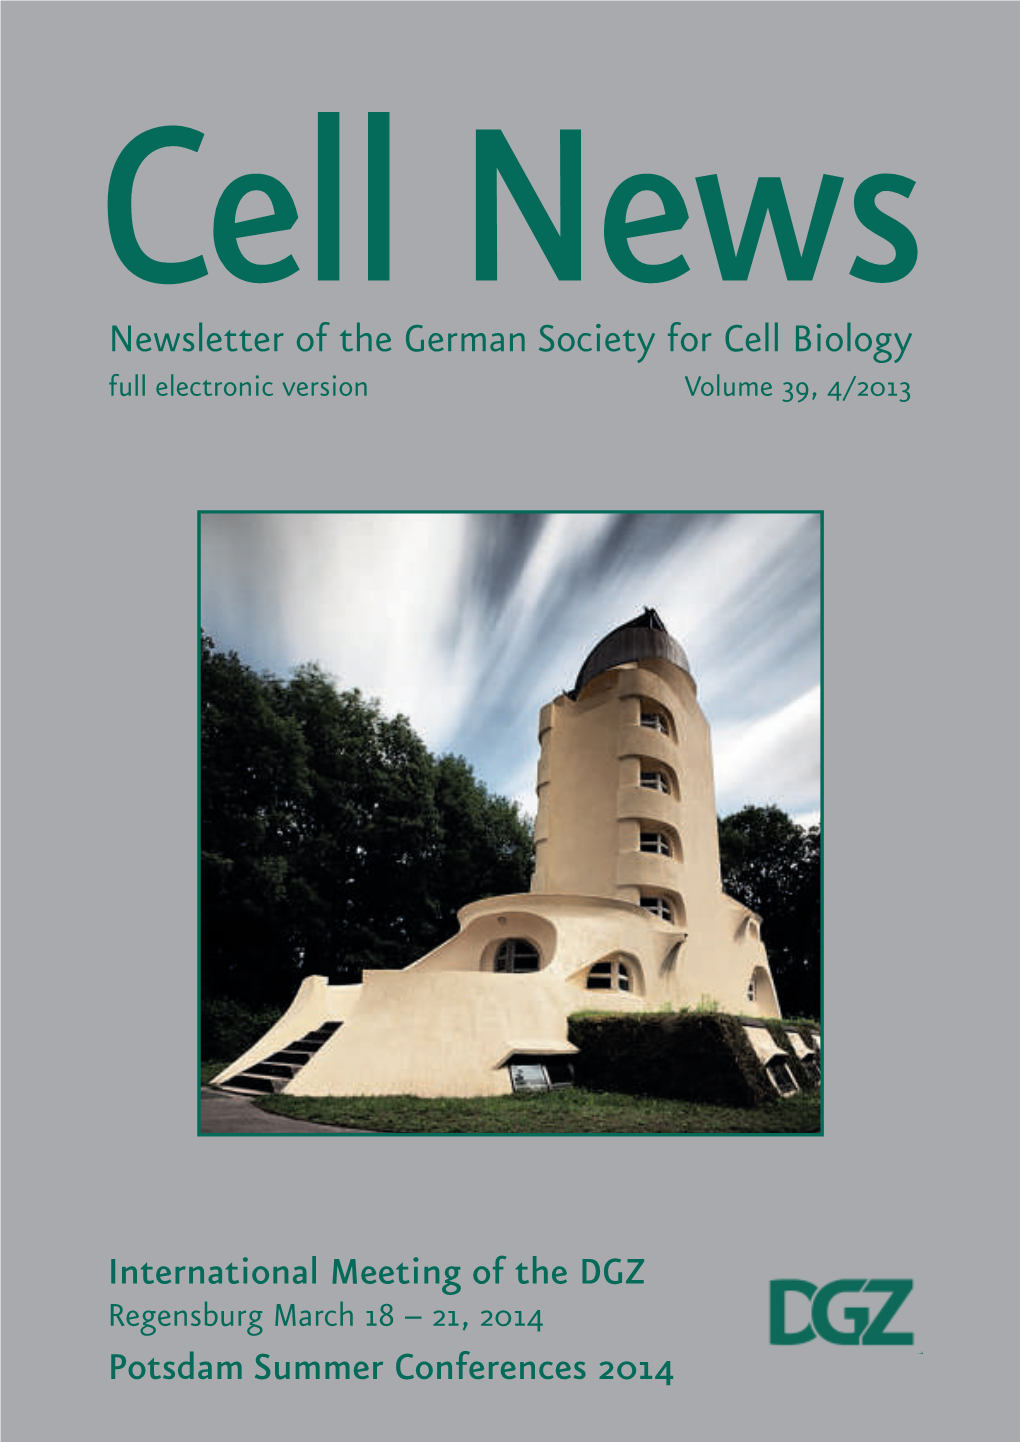 Newsletter of the German Society for Cell Biology Full Electronic Version Volume 39, 4/2013